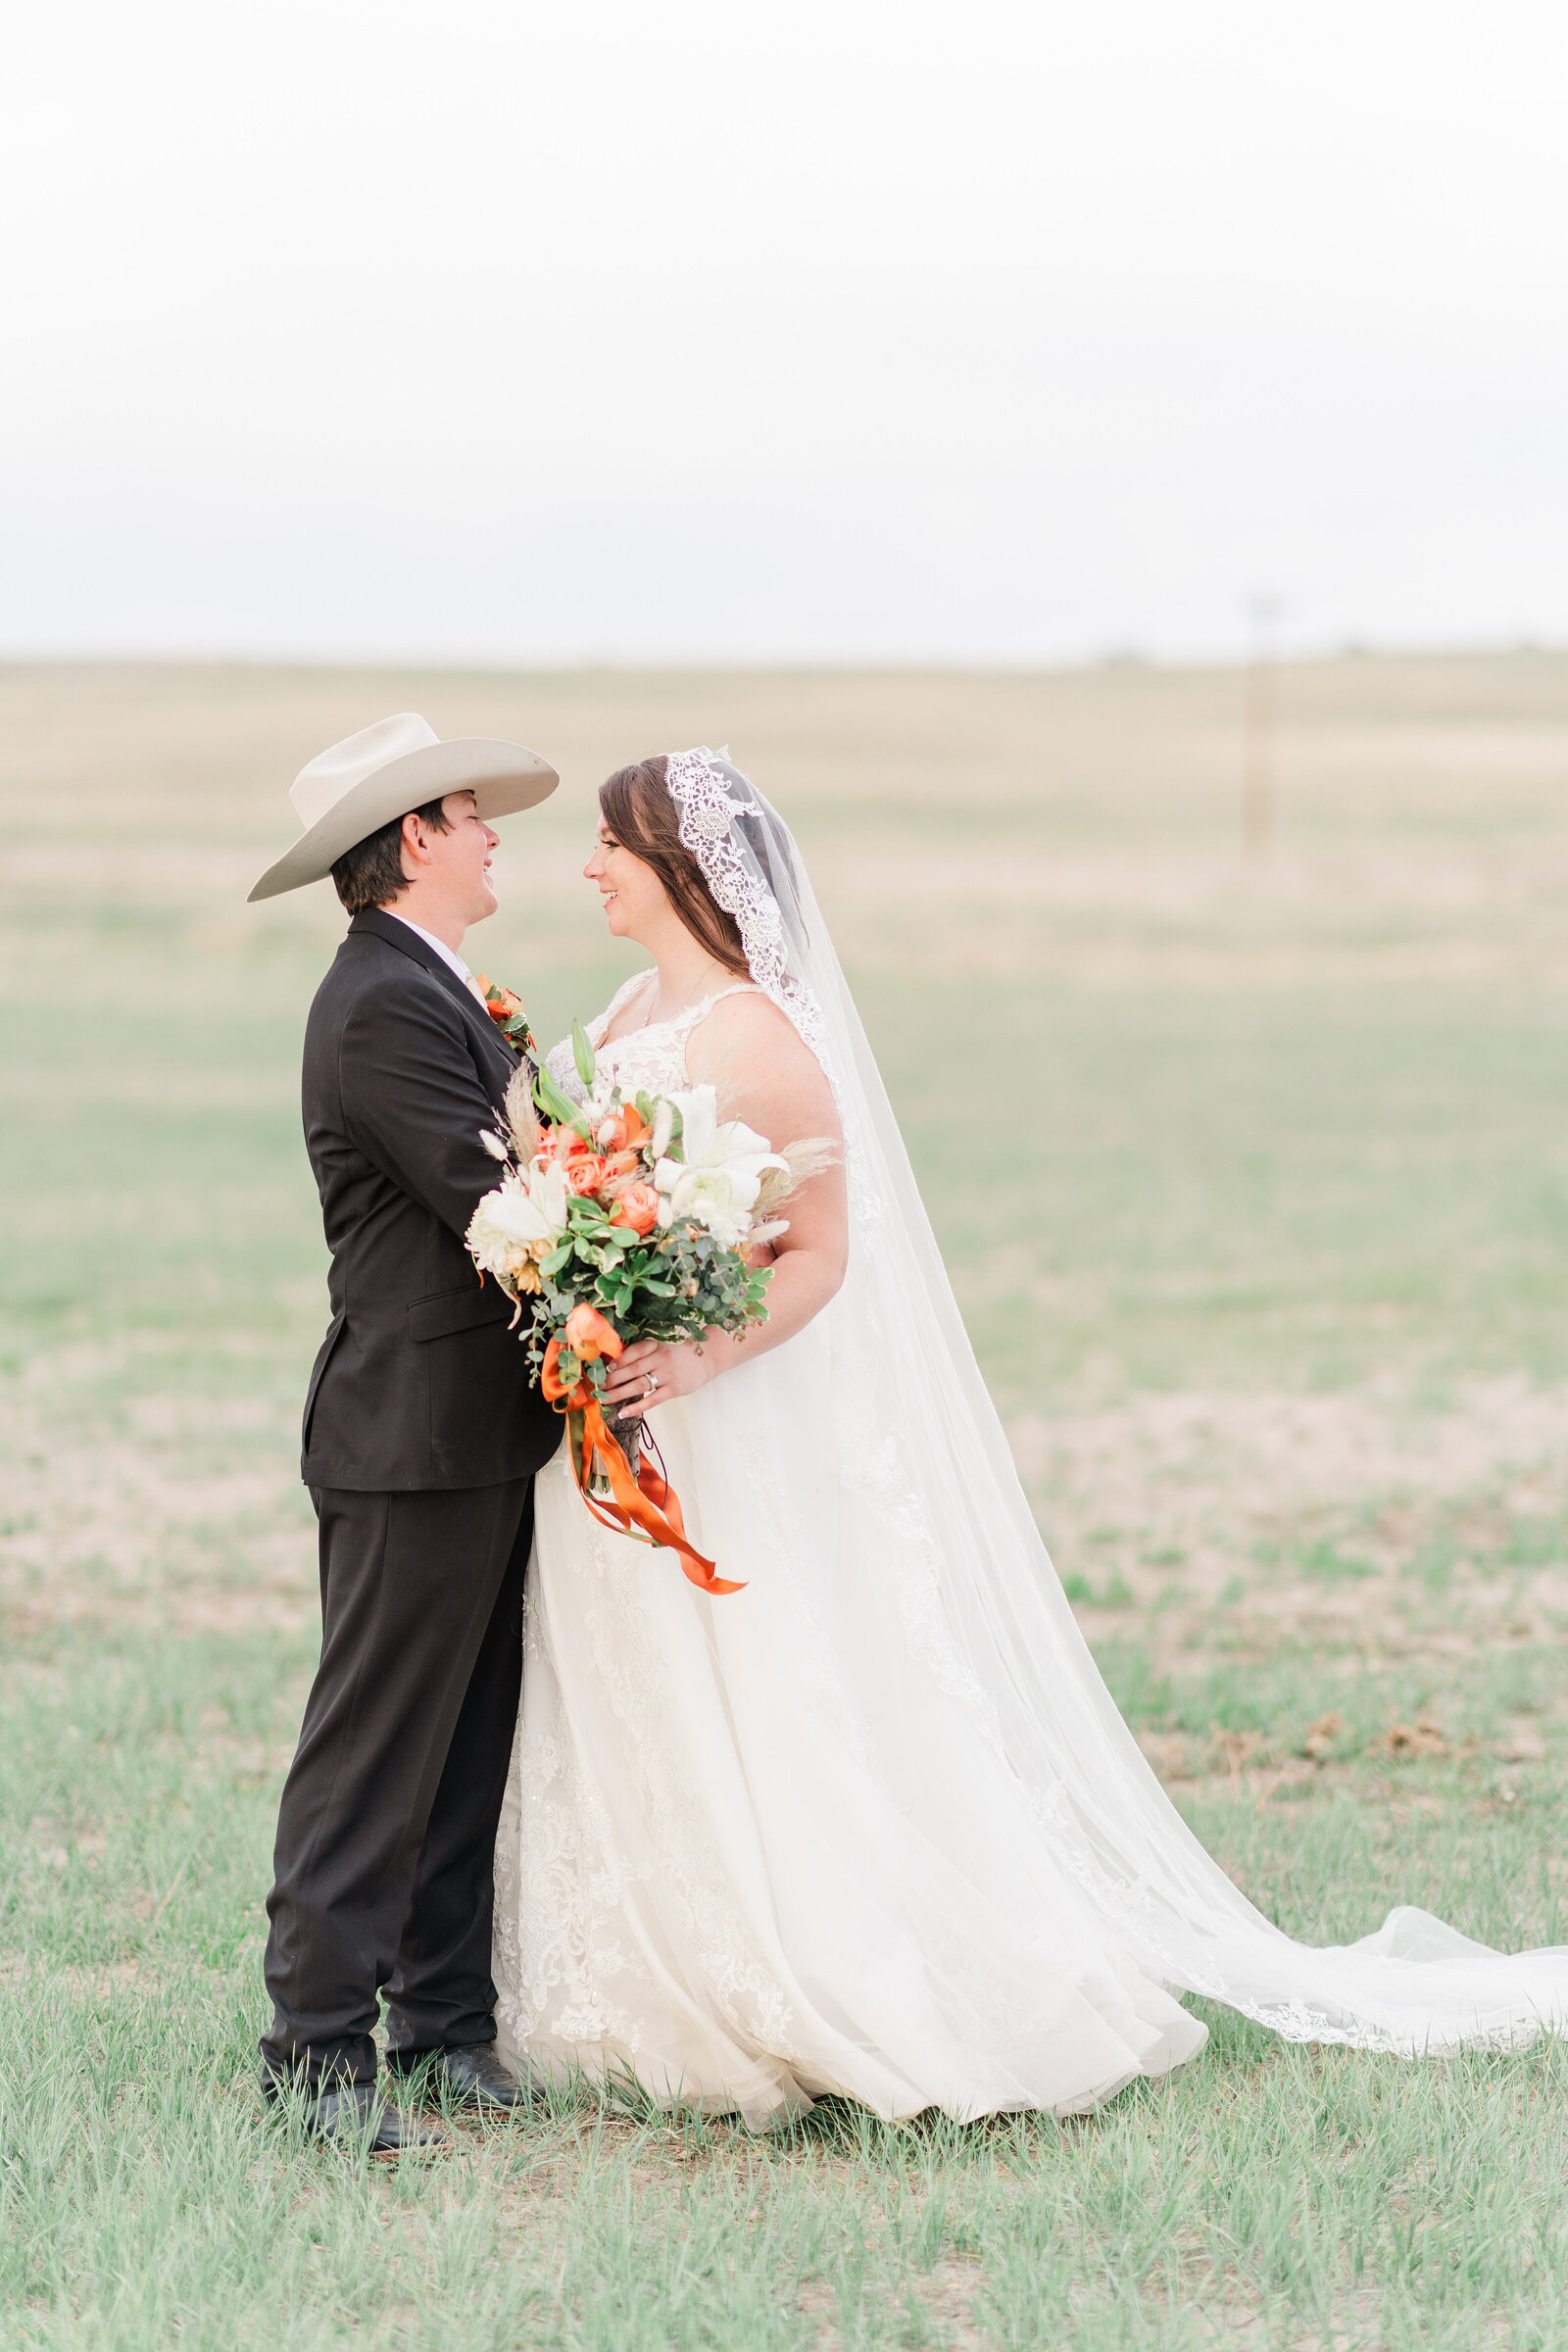 Sam Immer Photography captures the love and beauty of scenic Colorado engagements. Trust us to document your special moments with personalized and stunning photography that will last a lifetime.